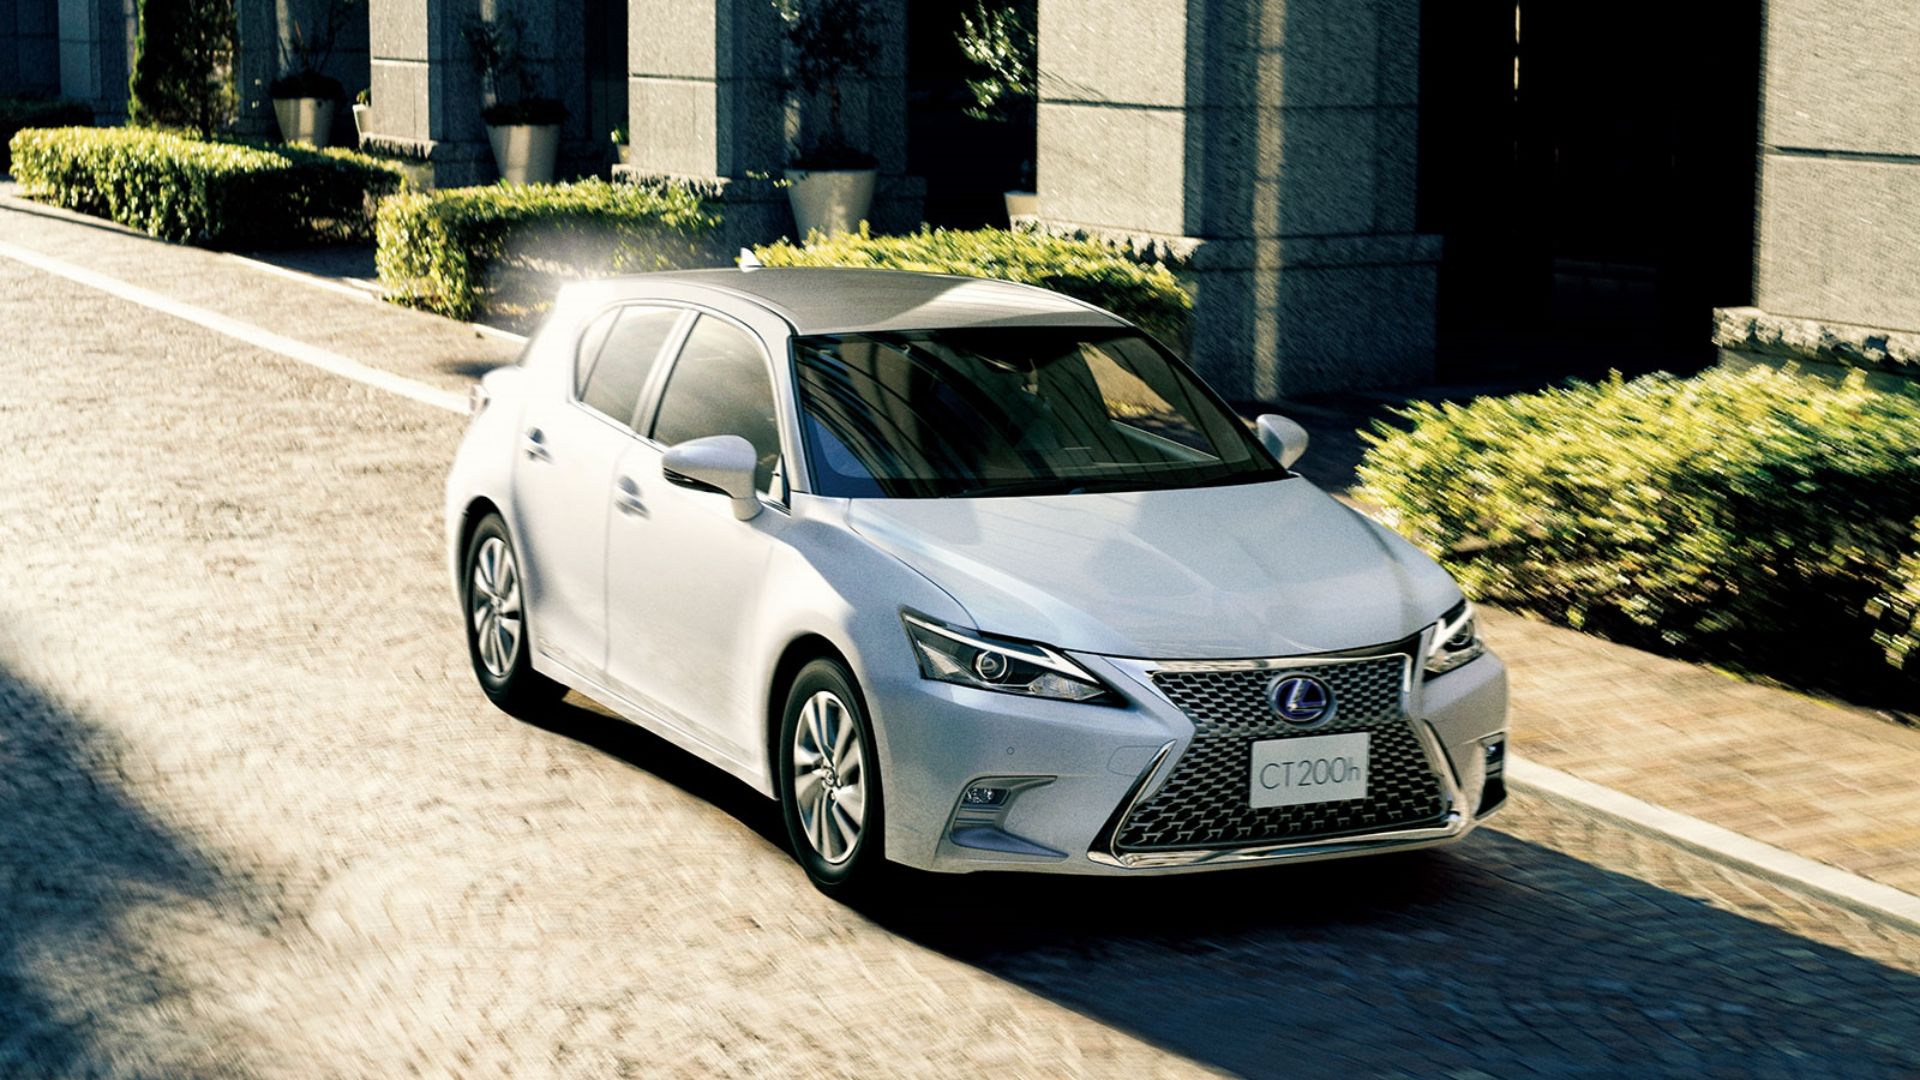 2022 Lexus CT 200h Cherished Touring Edition in silver